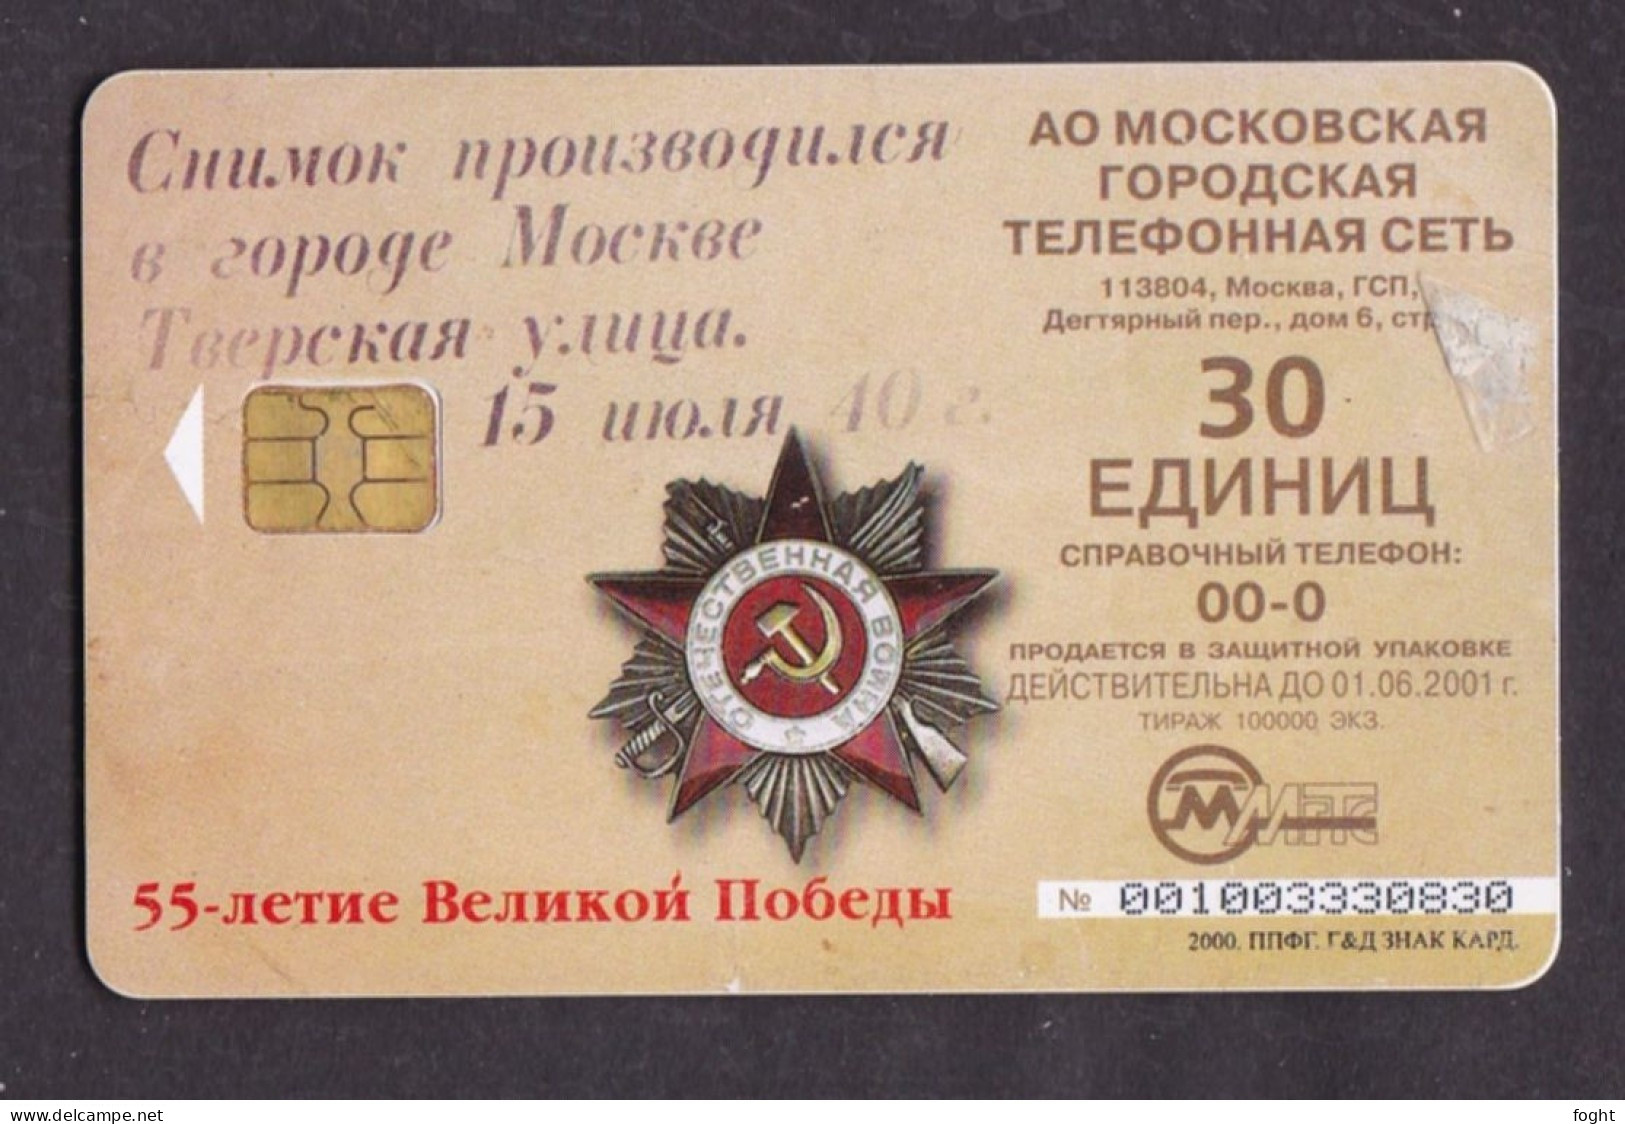 2000 Russia, Phonecard ›The Picture Was Made 15-07-1940,30 Units,Col:RU-MG-TS-0069 - Russie